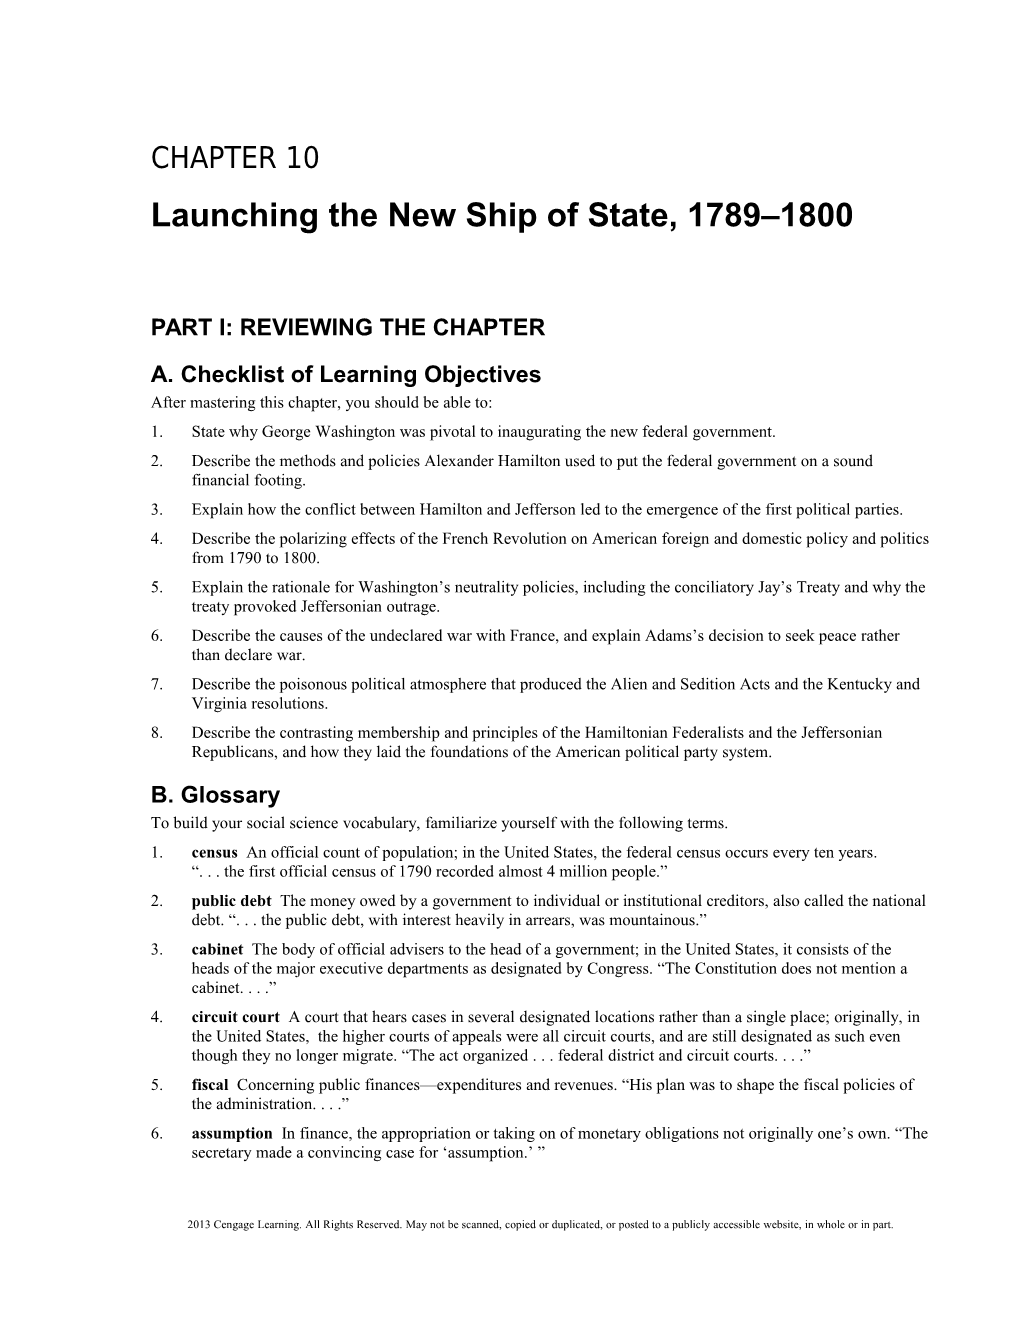 Chapter 10: Launching the New Ship of State, 1789 1800 1